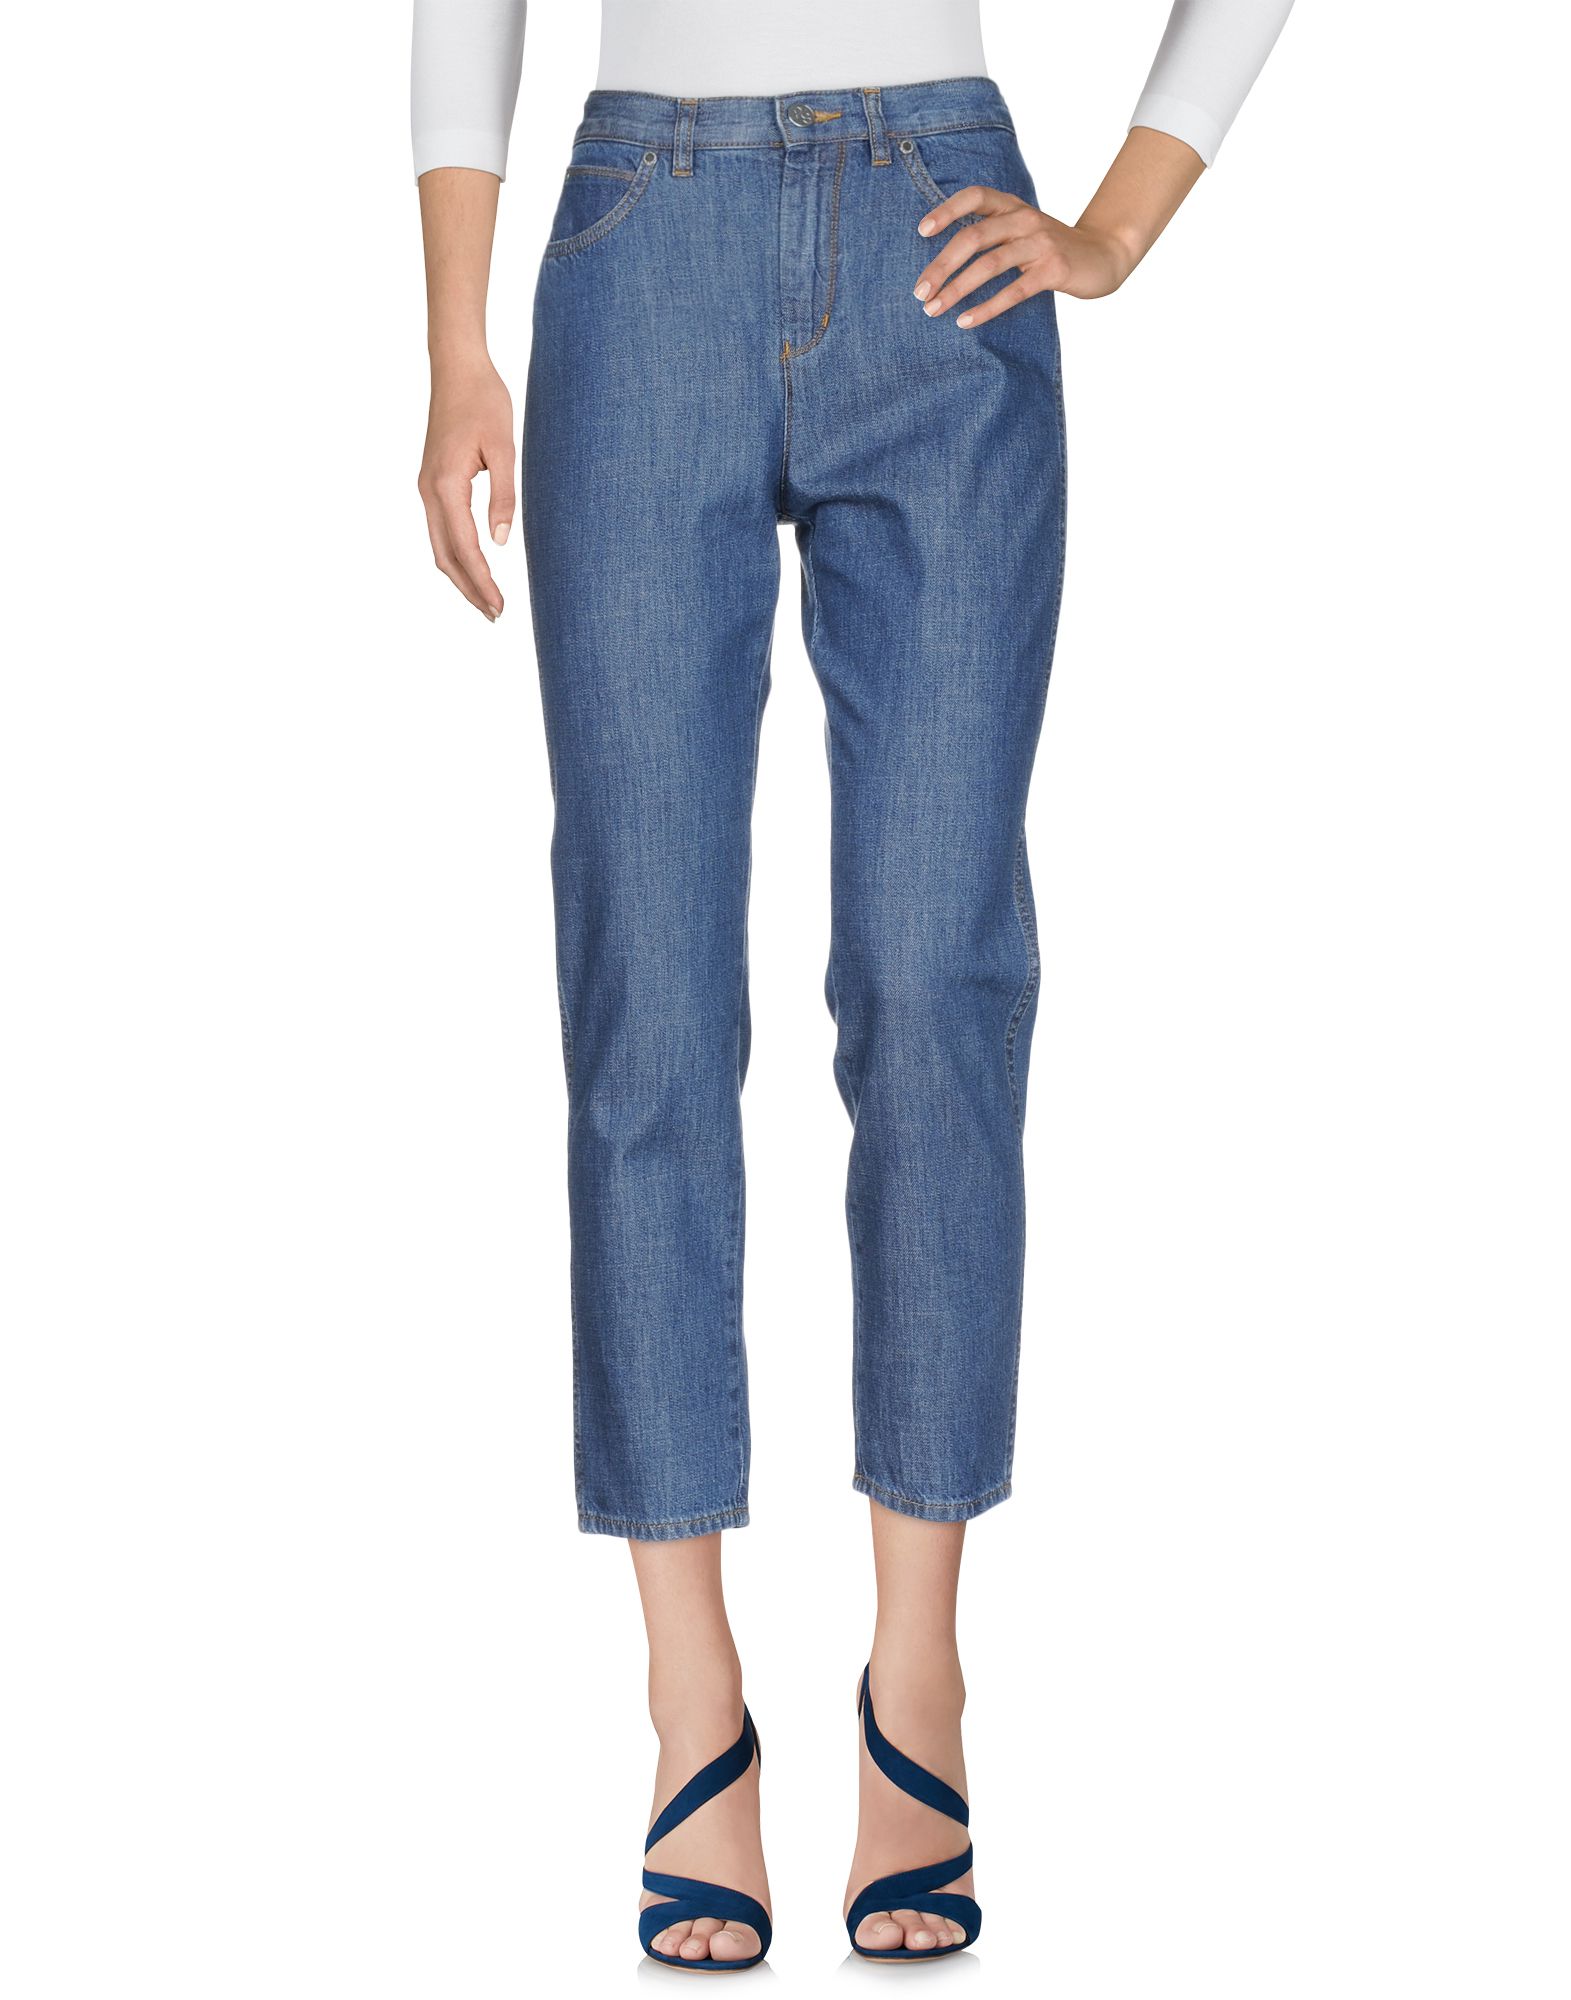 PS BY PAUL SMITH Denim pants,42665626AW 8